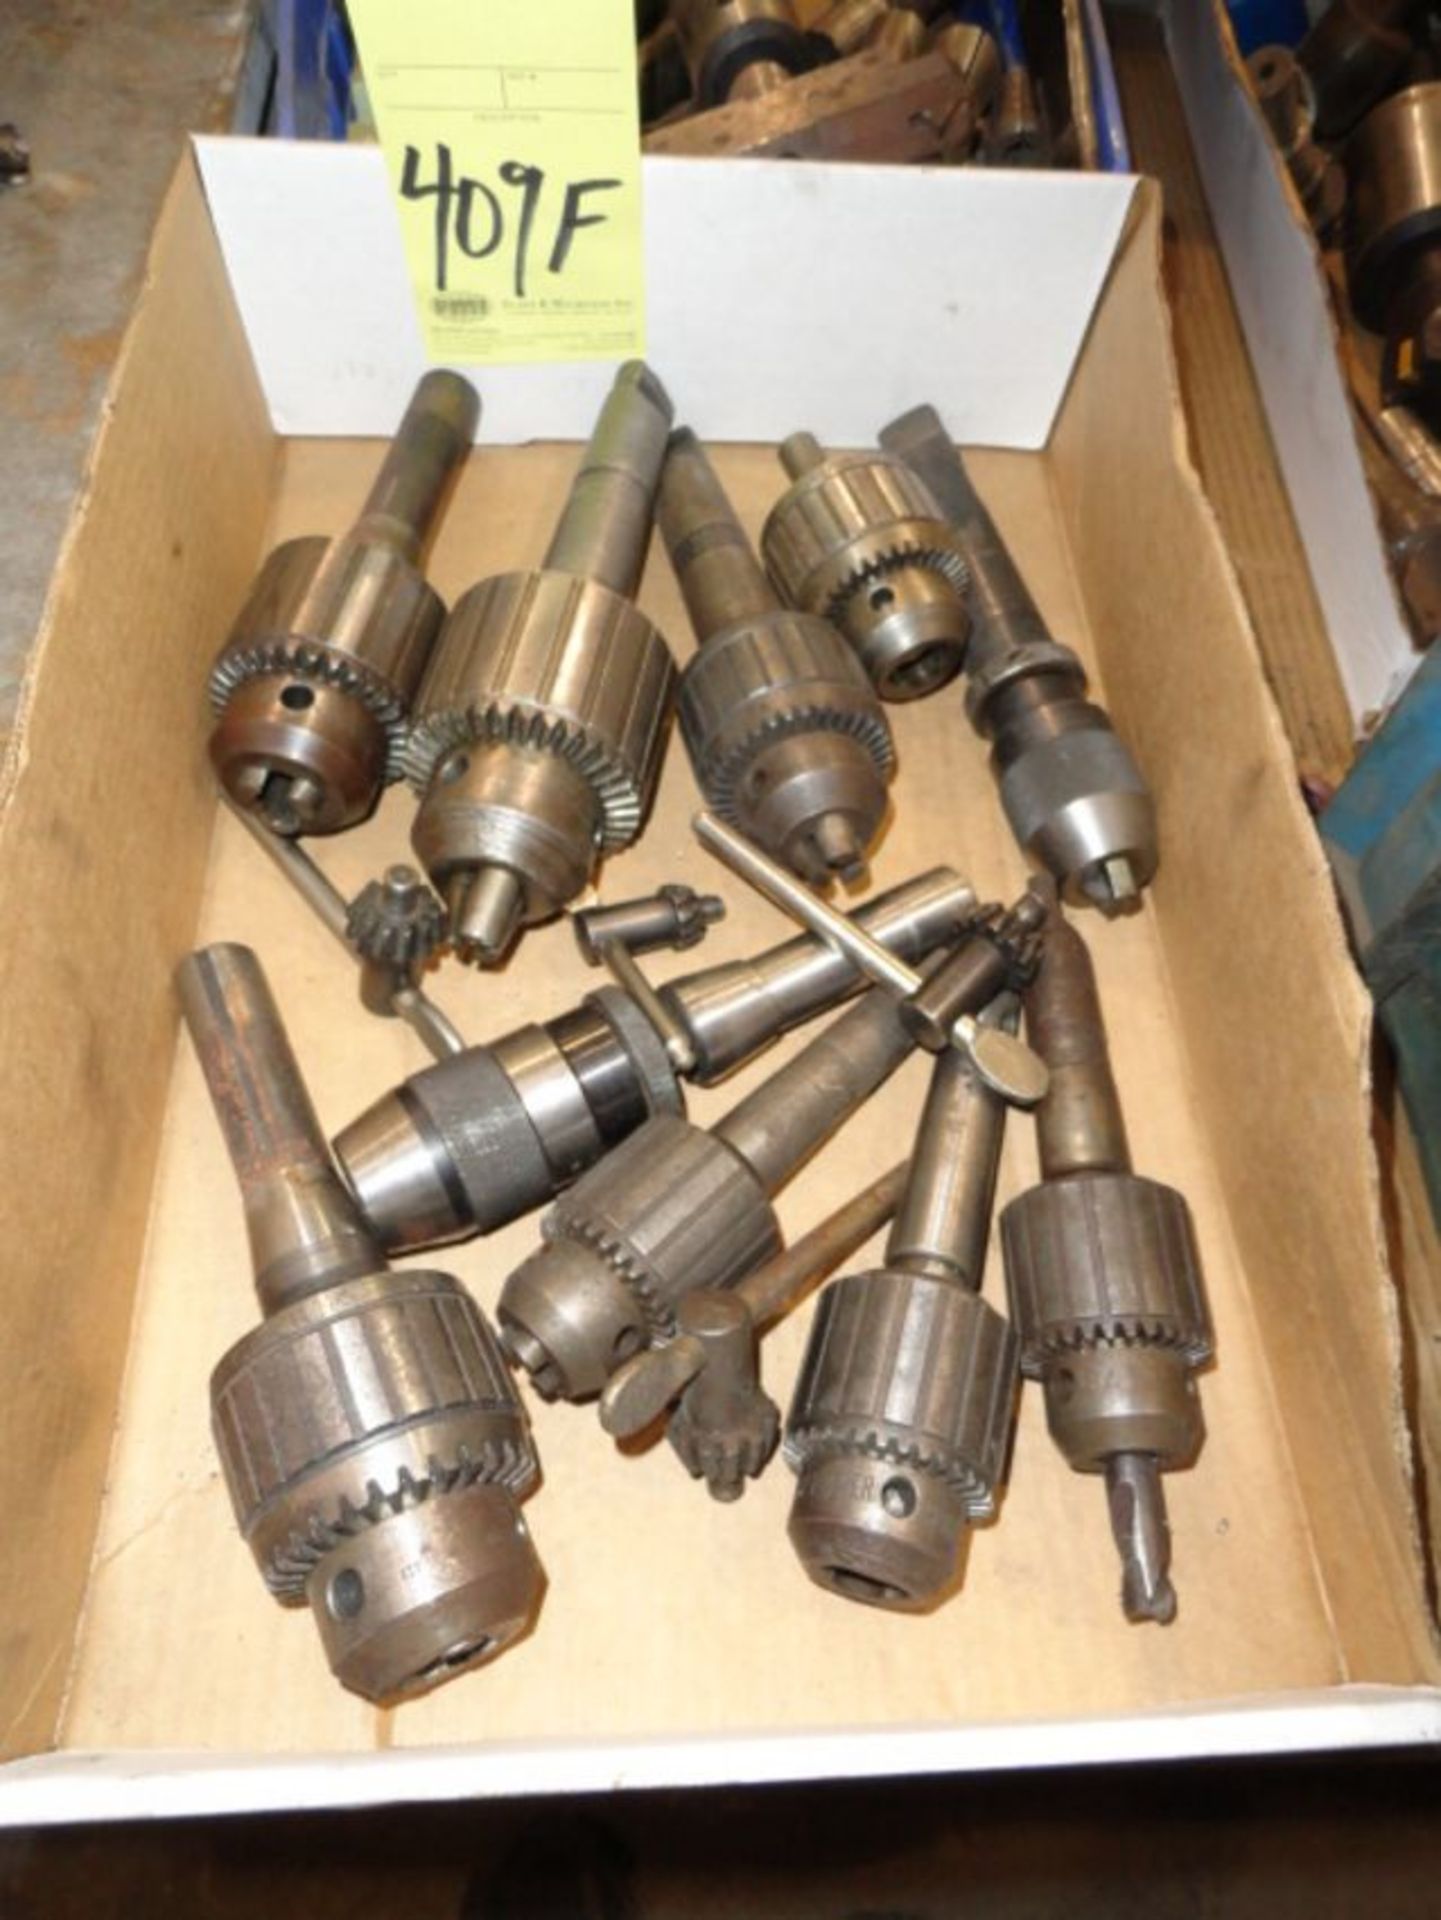 LOT CONSISTING OF: Jacobs chucks, R8 & morse shank, misc. - Image 2 of 2